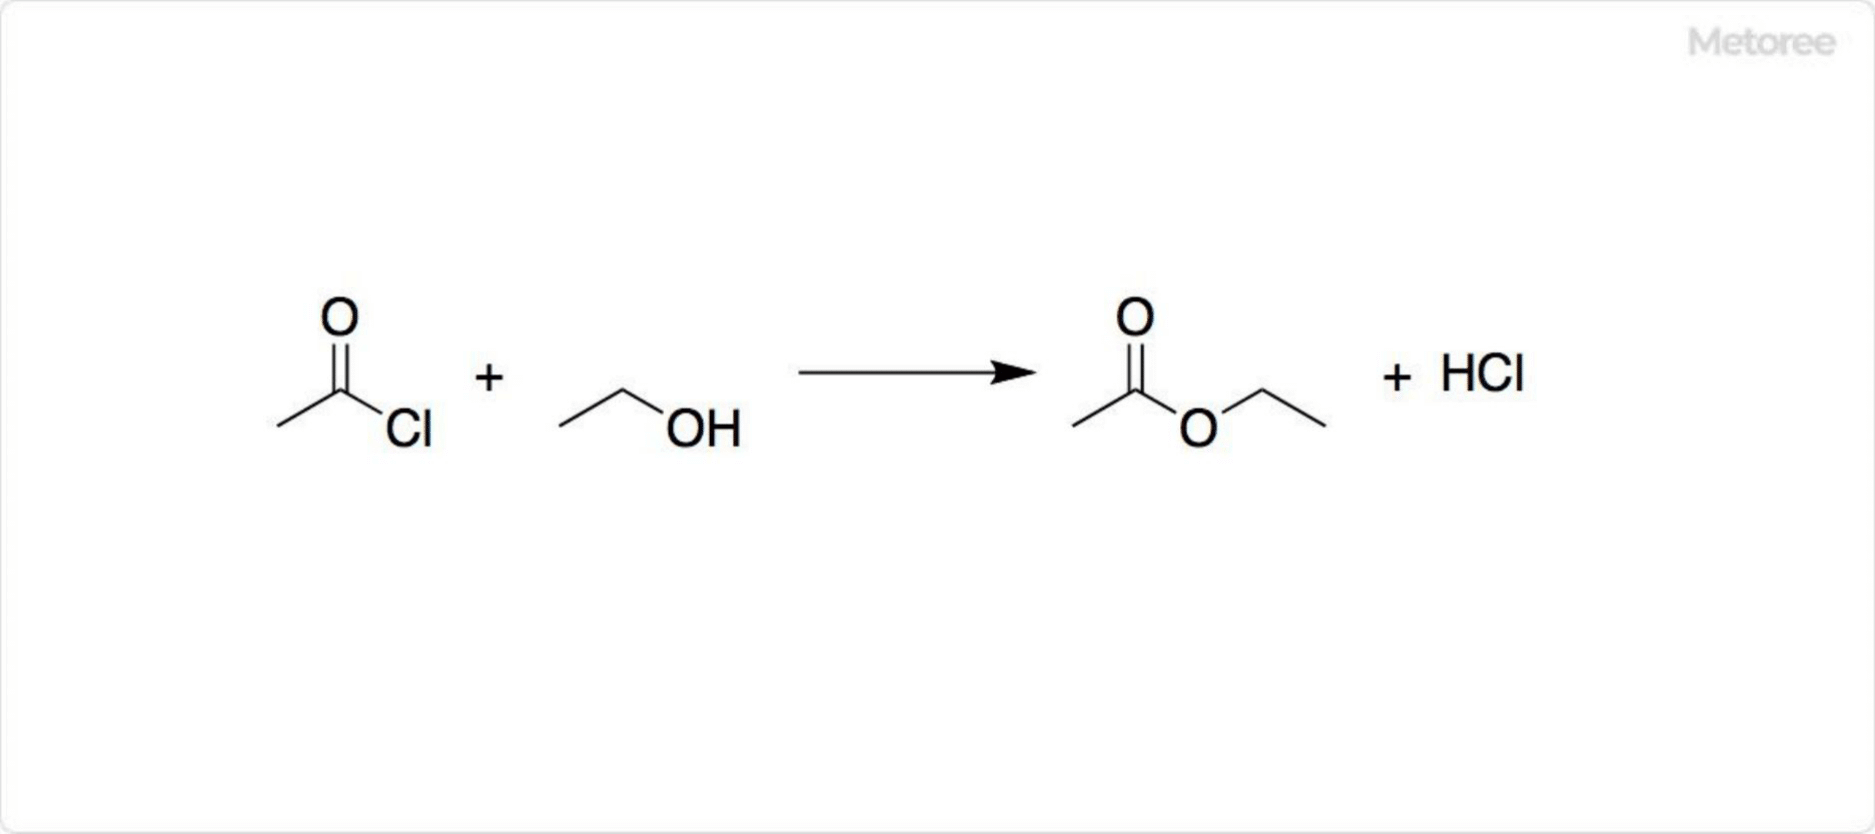 Figure 3. Reaction of Acetyl Chloride